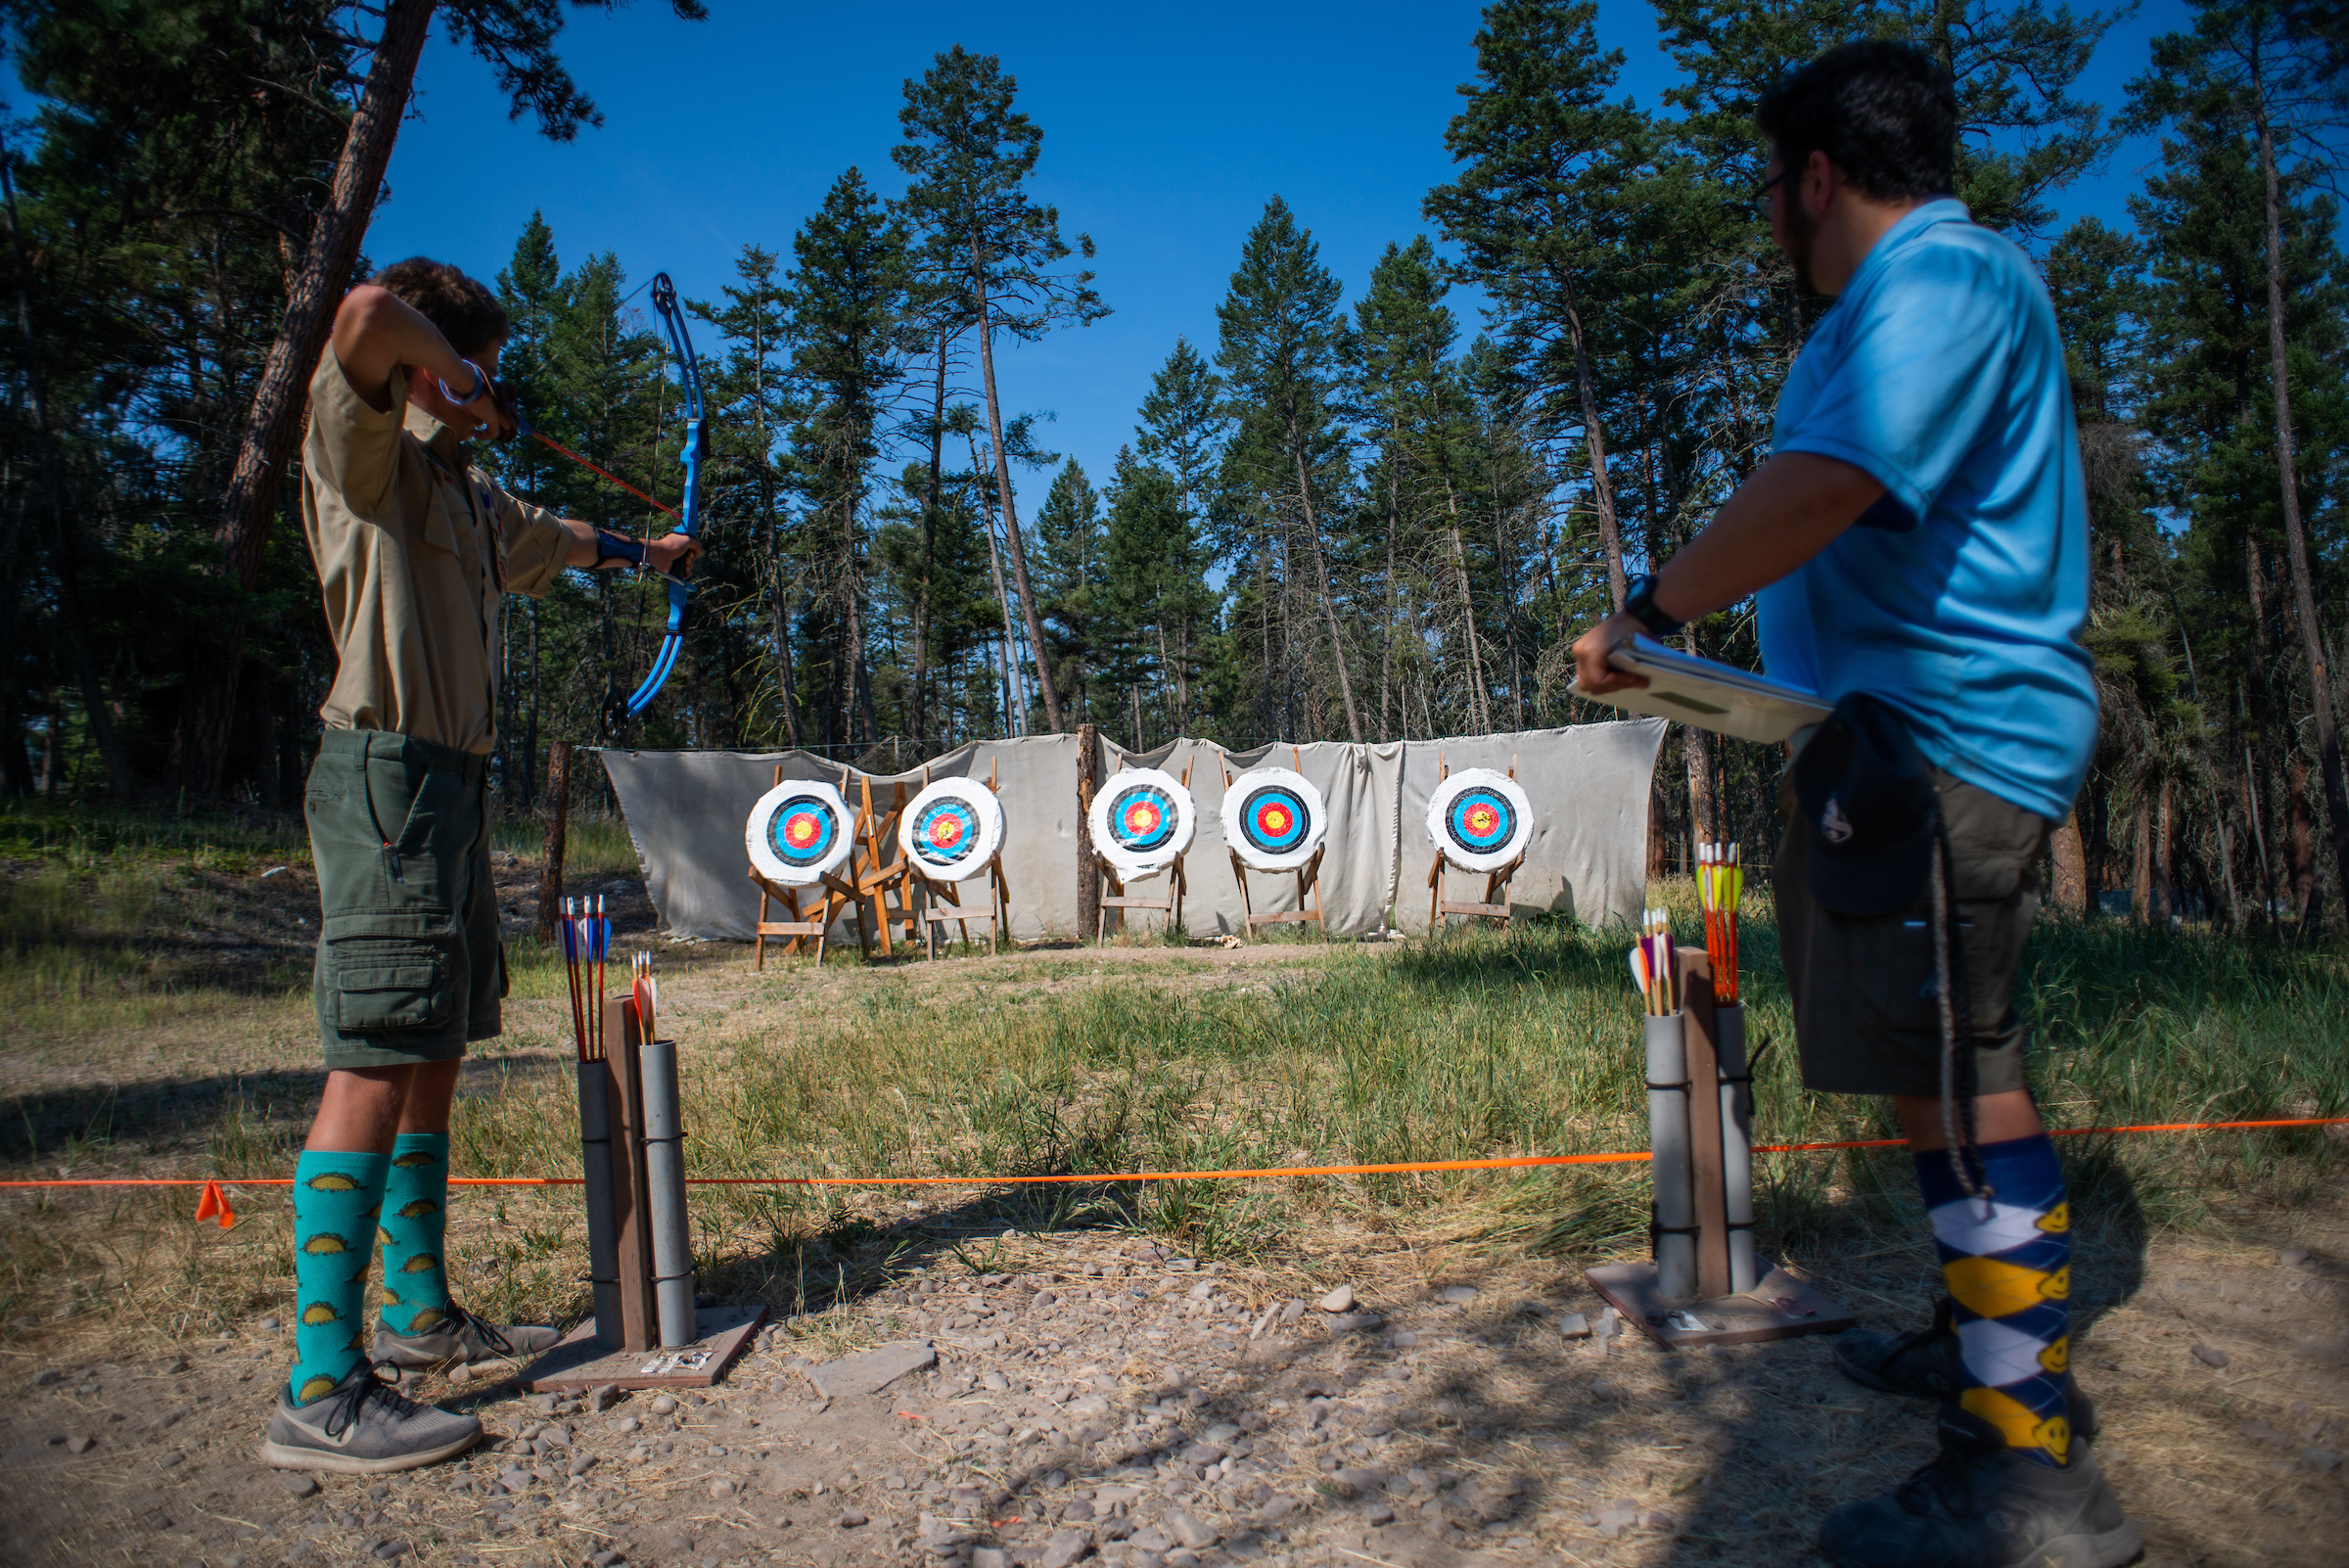 Camp counselor teaches Boy Scout archery at summer camp